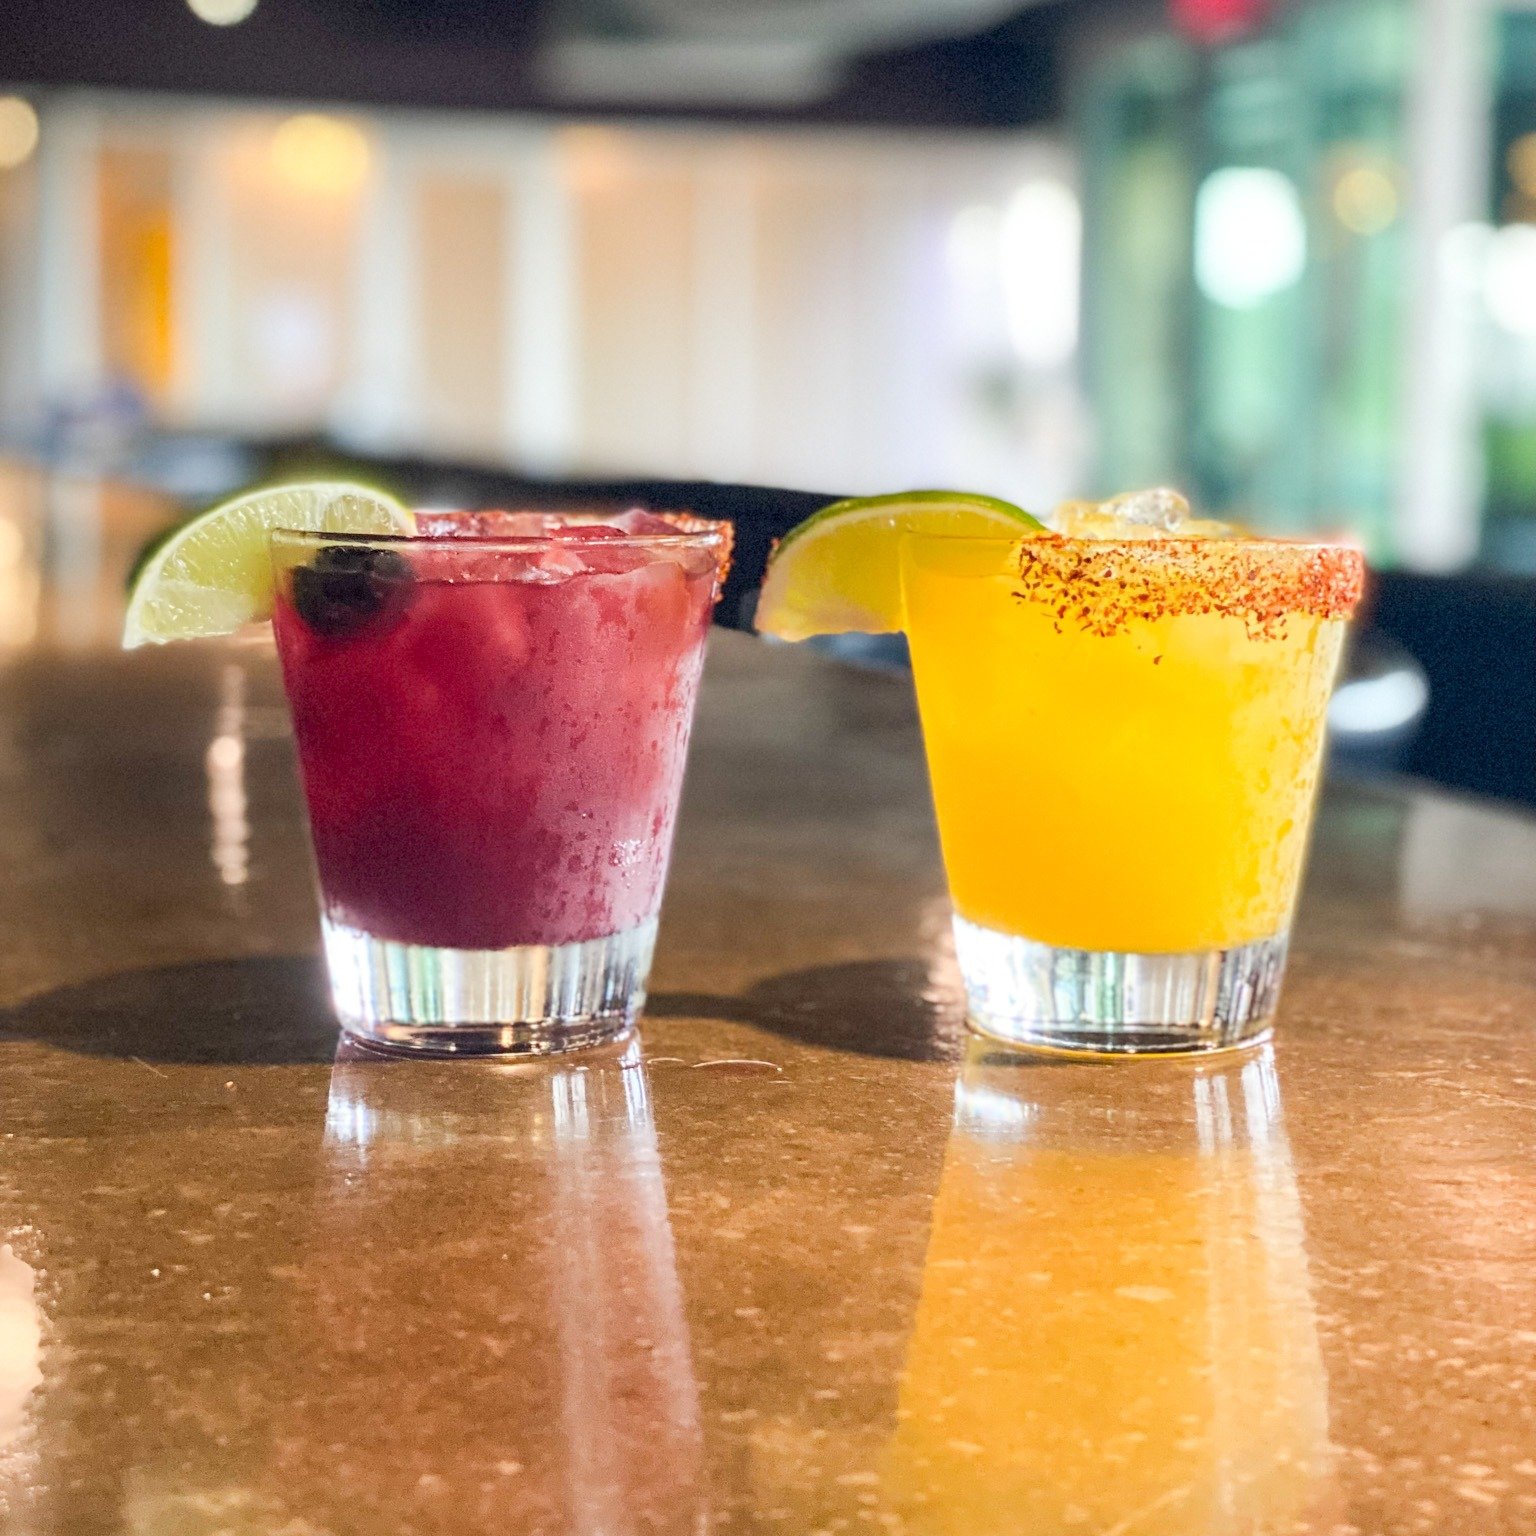 They say two minds are better than one. What about two drinks in each hand? 

It's a beautiful day to try our current drink specials. ☀️

🥭 Fiery mango rum | Bacardi Chile mango rum, triple sec, mango pur&eacute;e, lime juice, and agave. With a taji